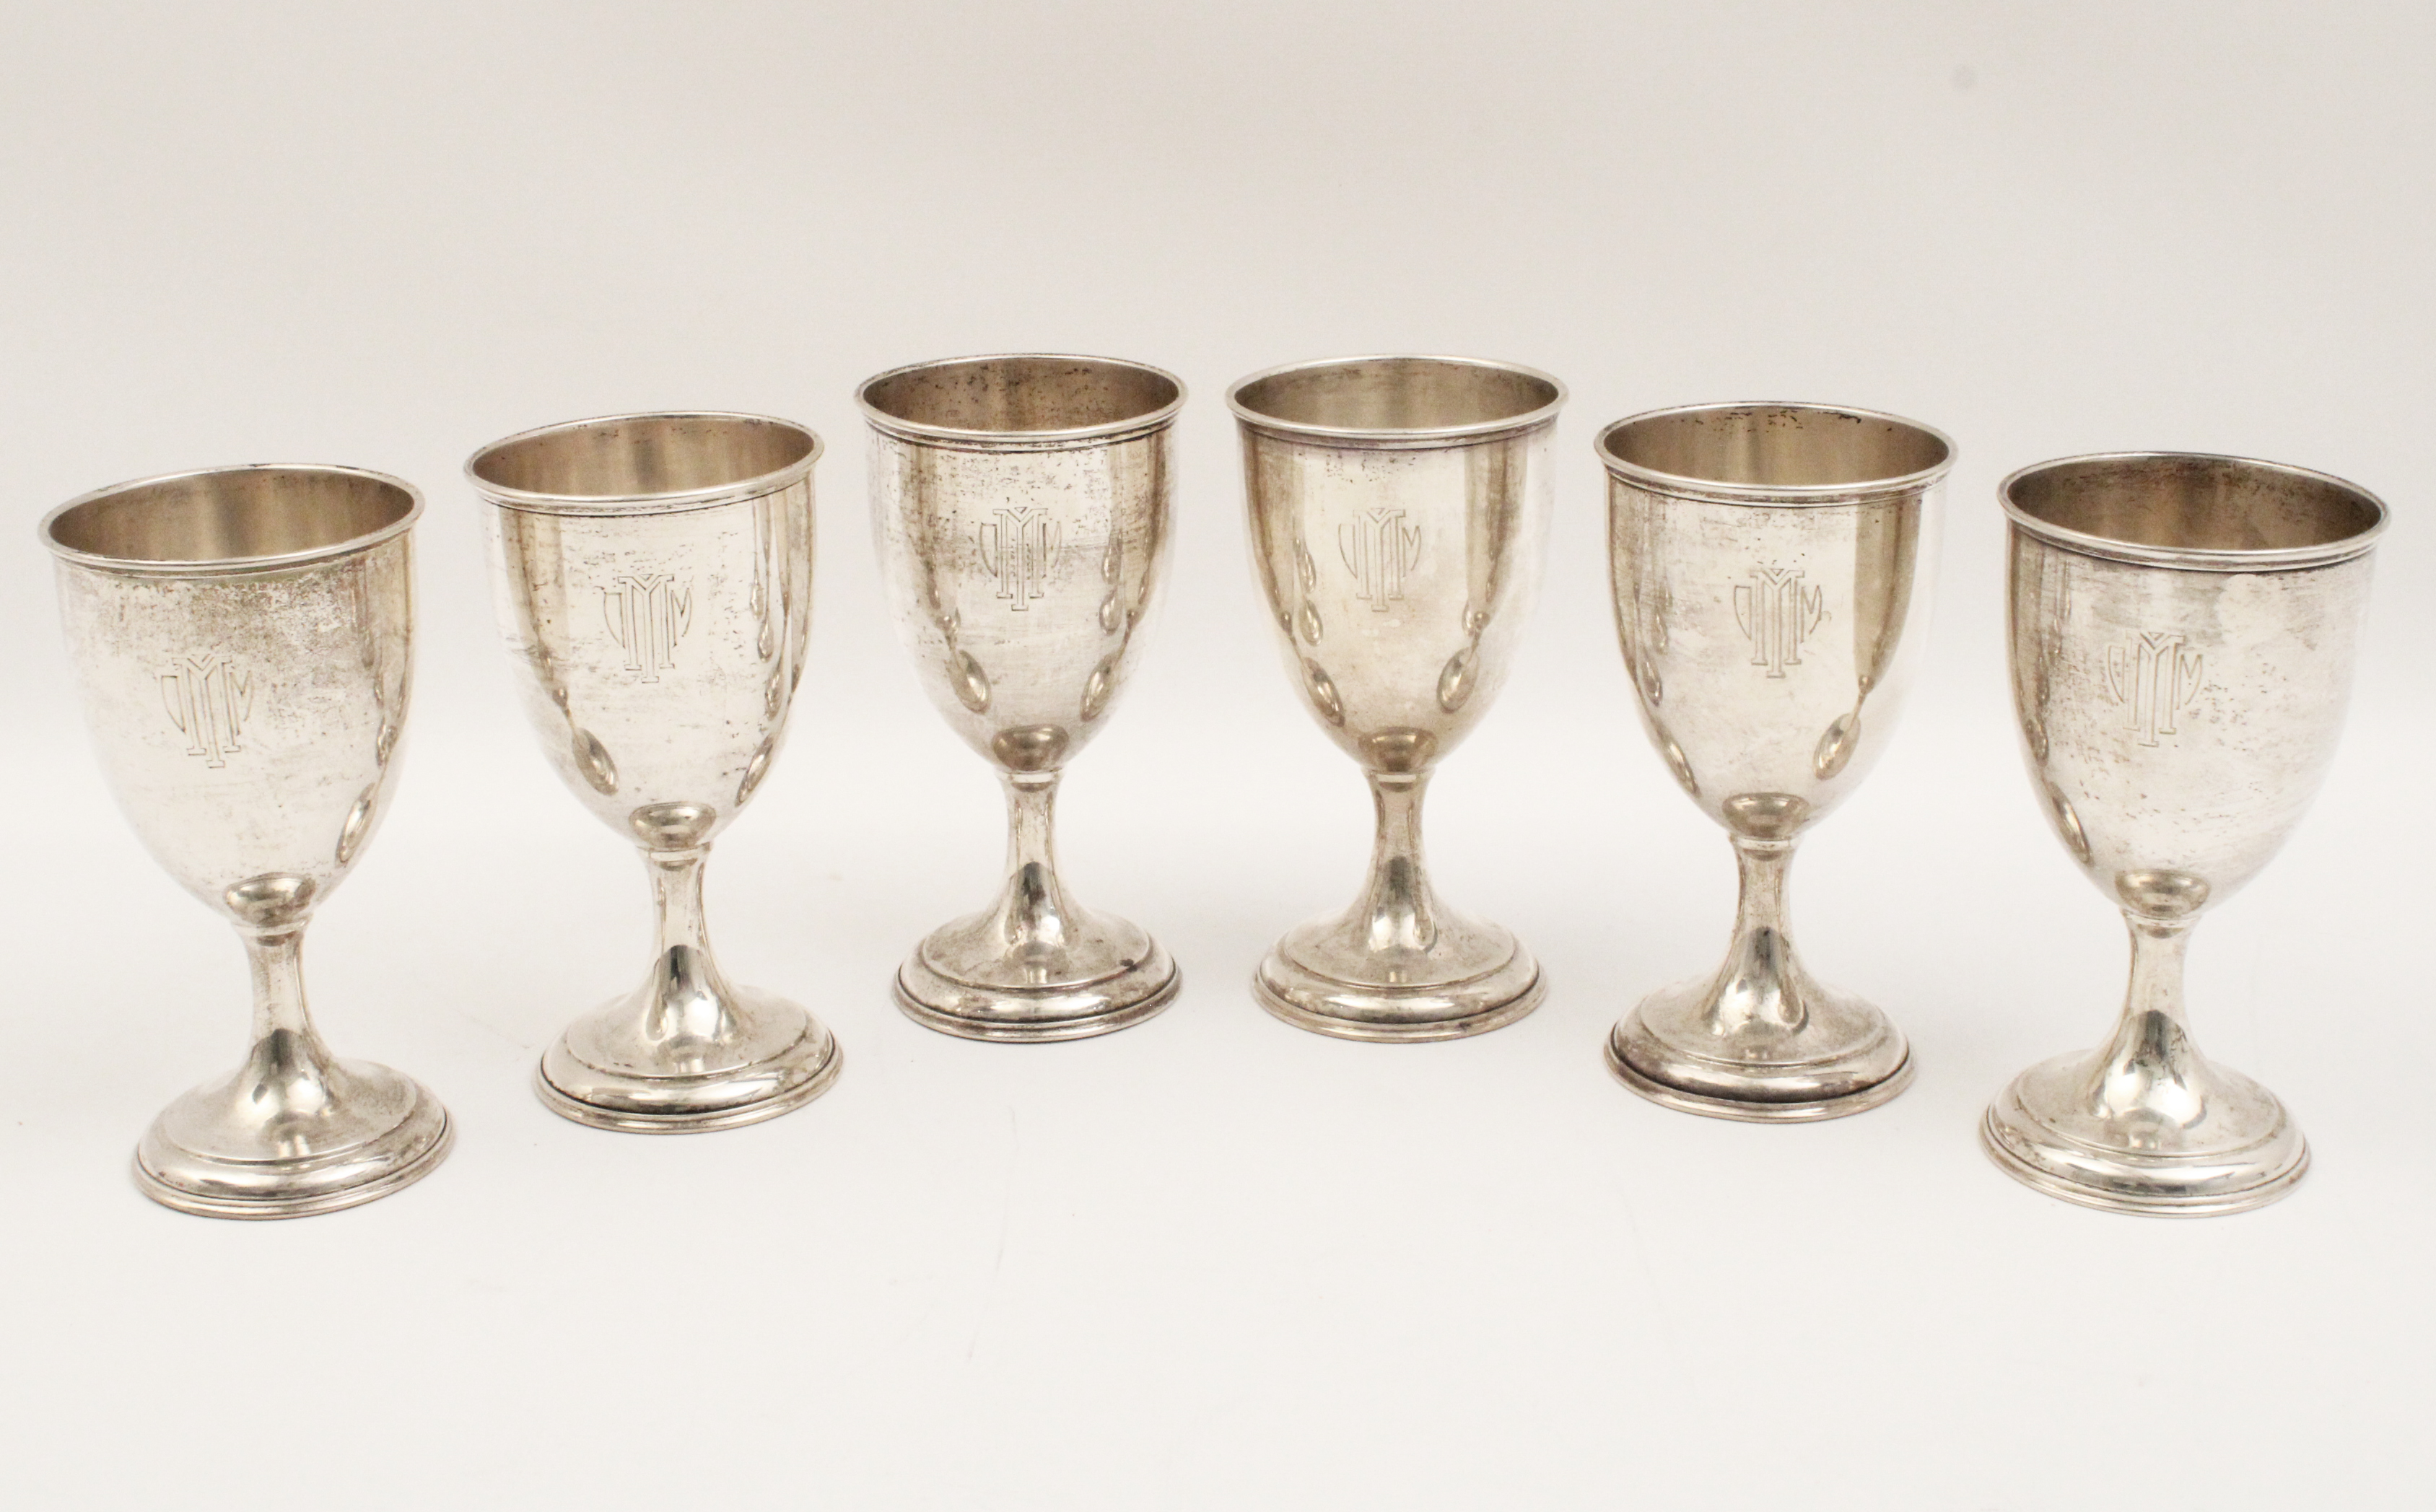 6 WALLACE STERLING SILVER GOBLETS  35eb9e